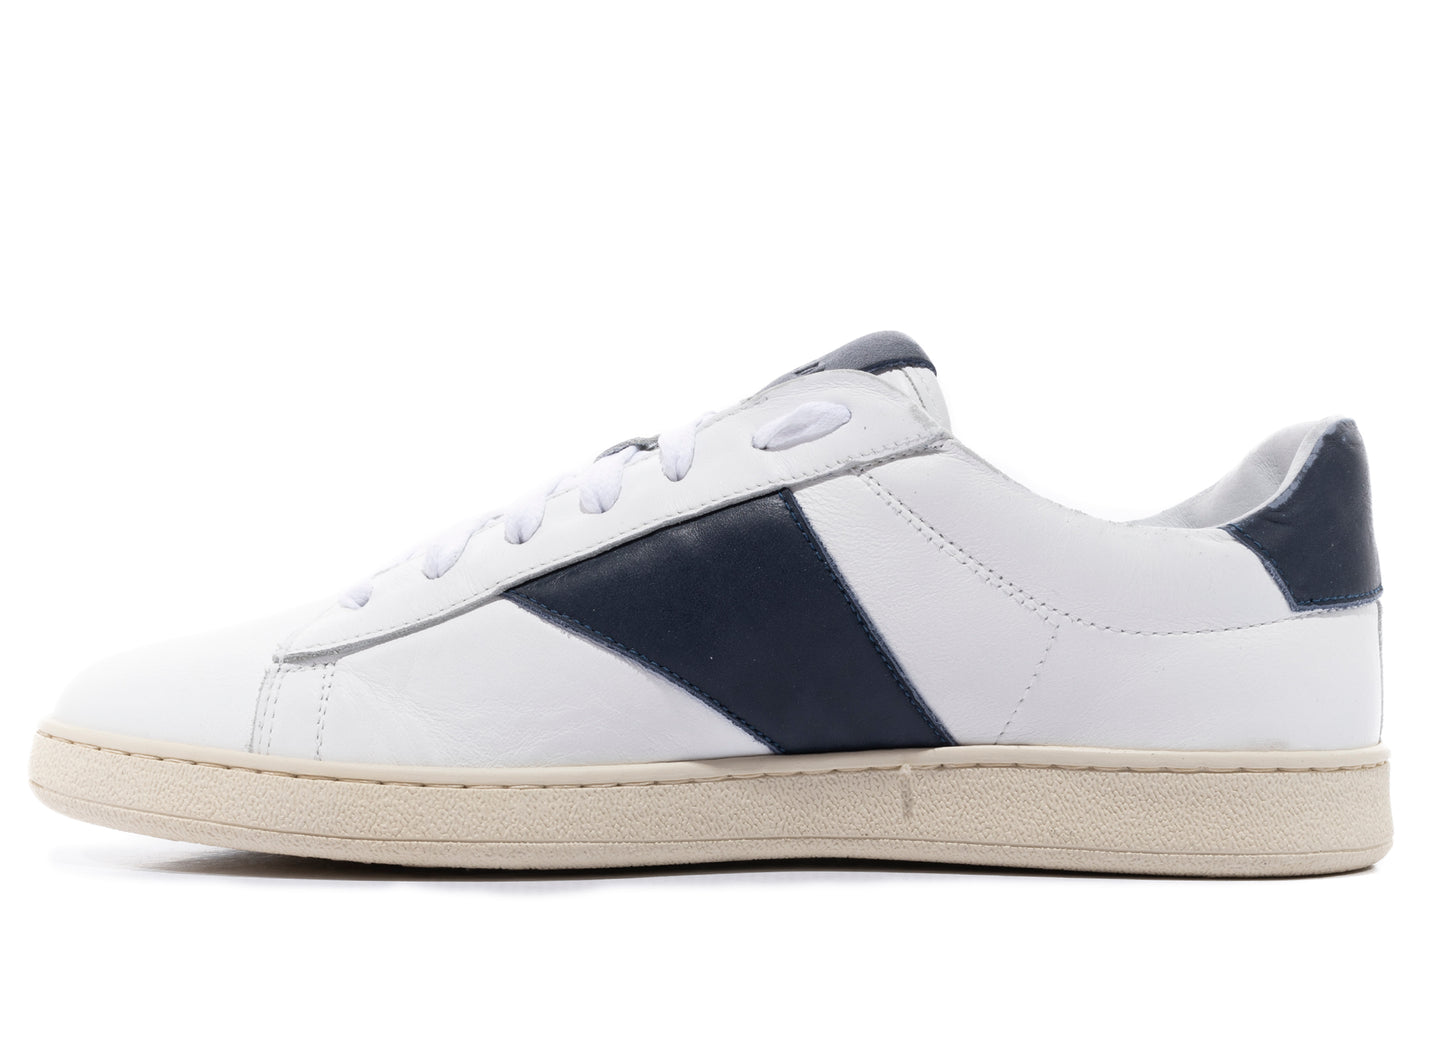 Rhude Court Shoe in White and Navy